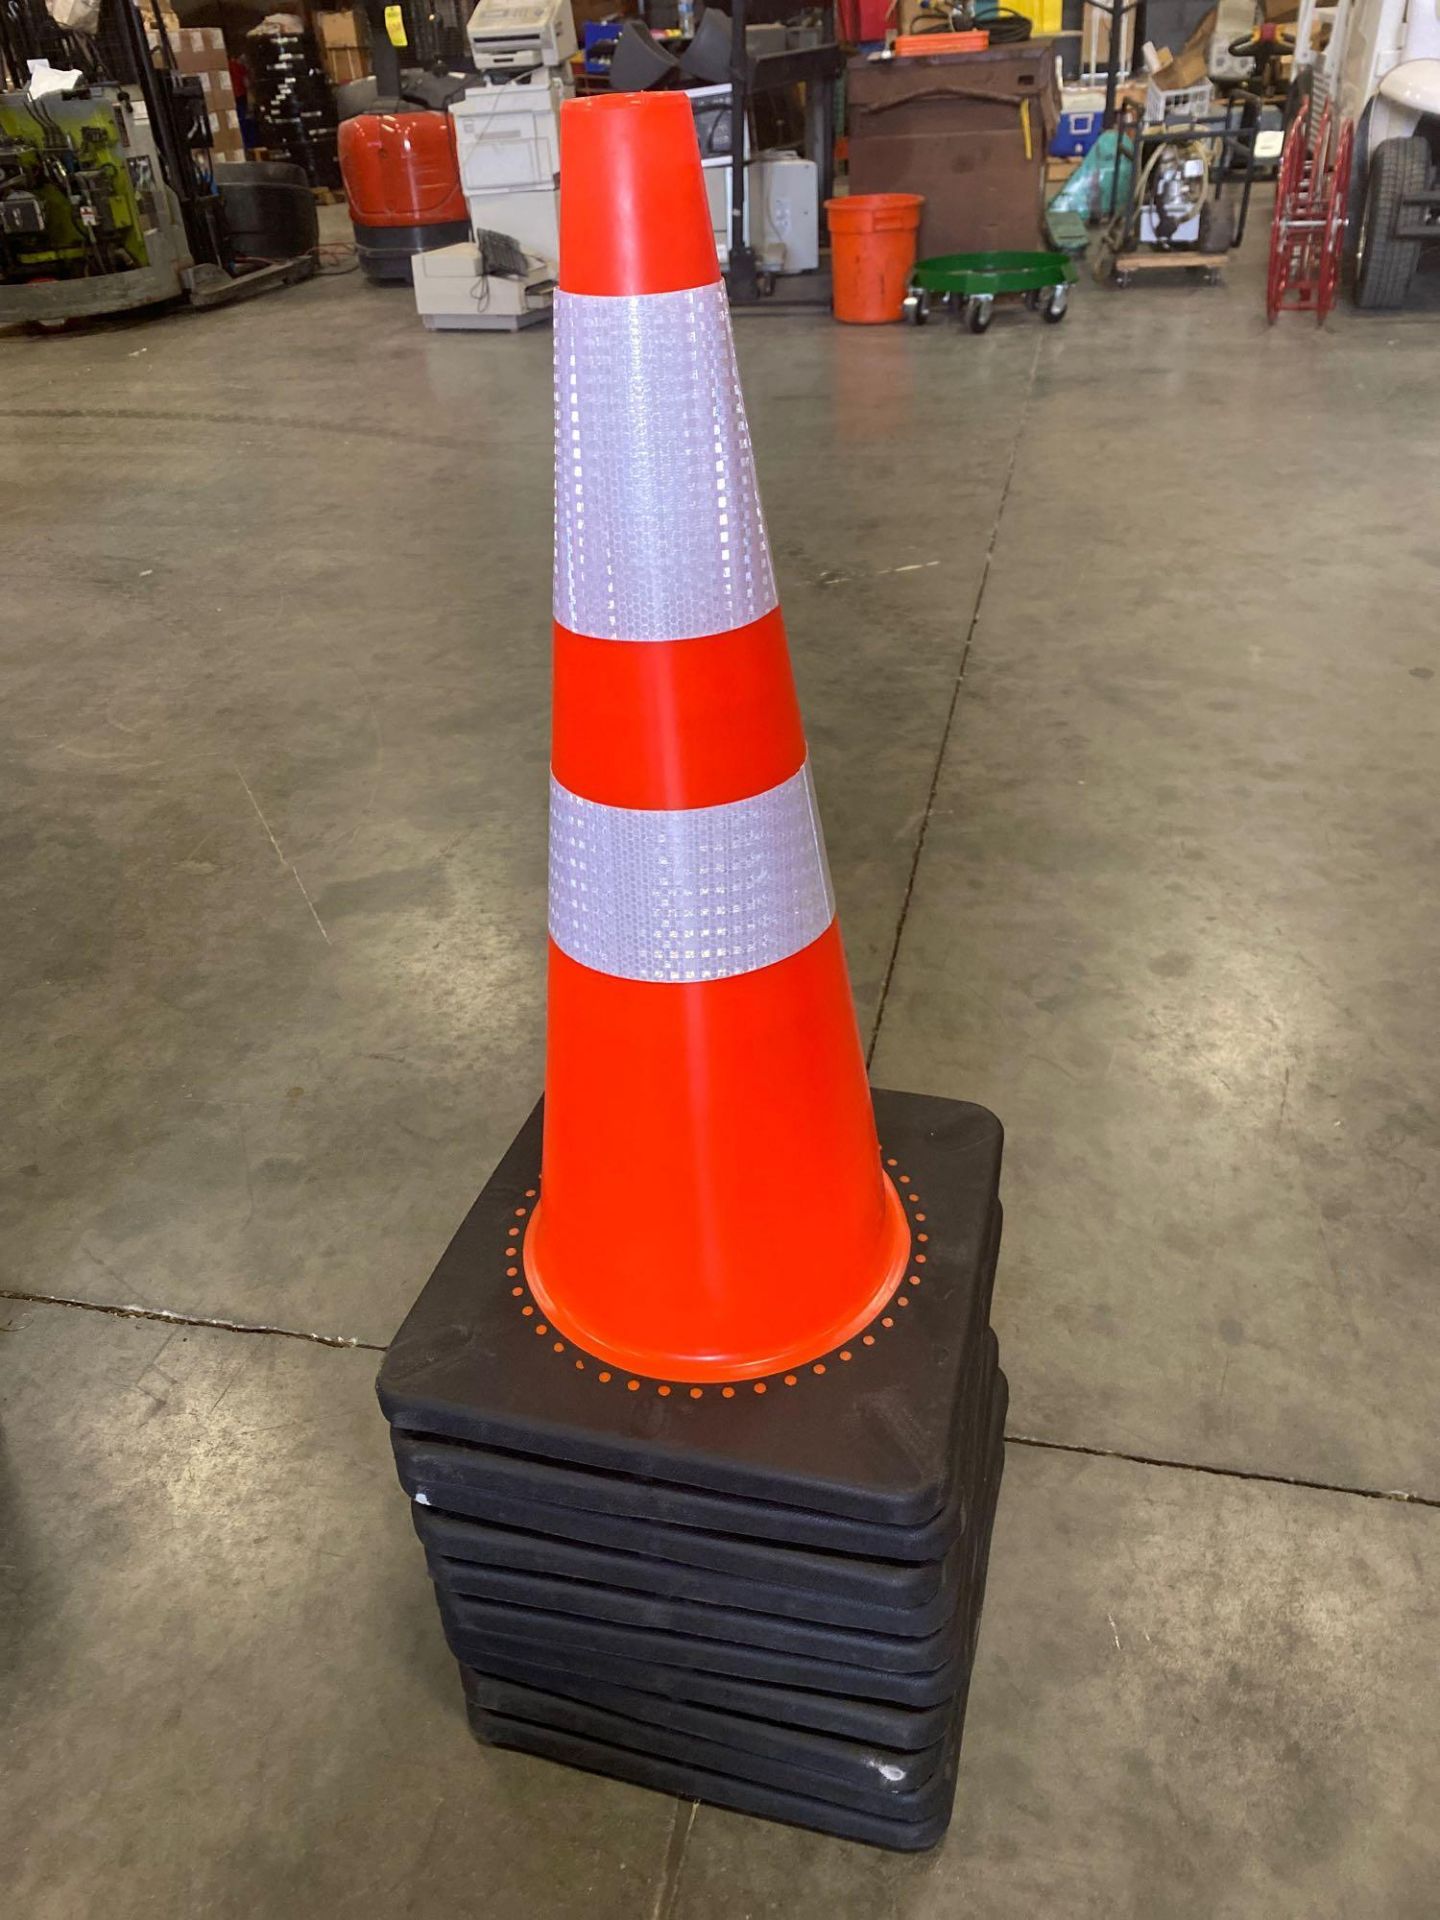 10 NEW SAFETY CONES - Image 2 of 2